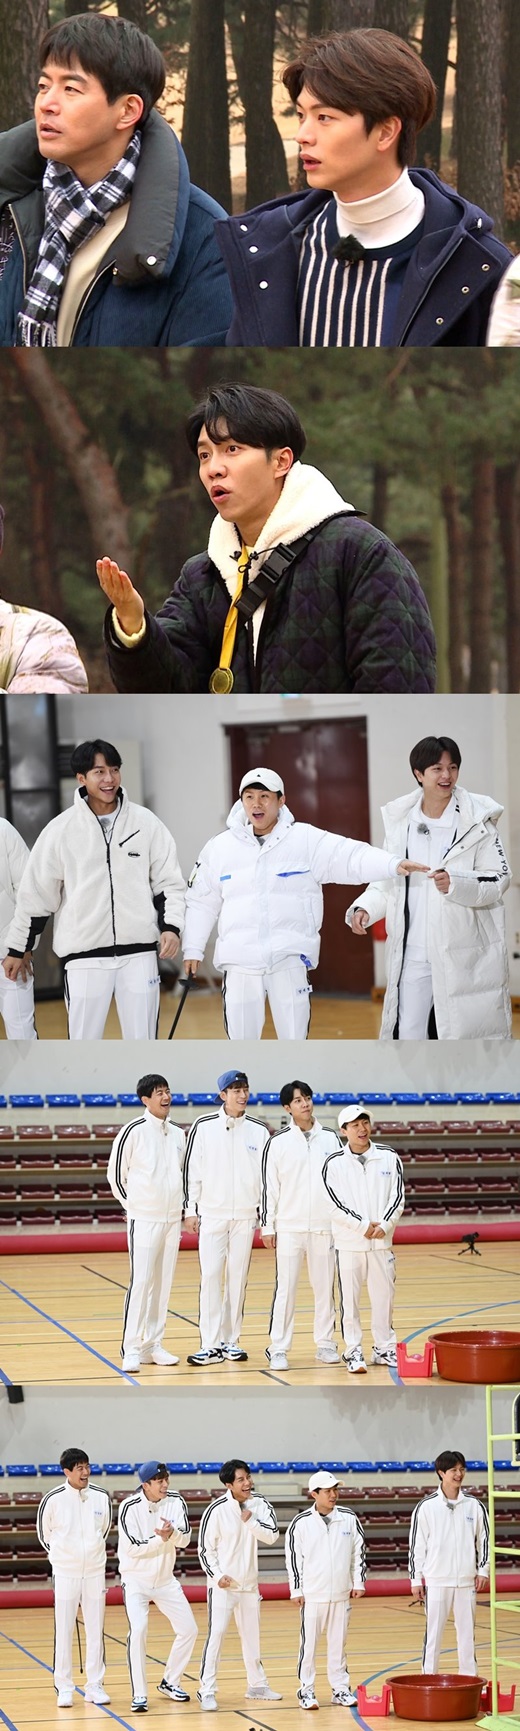 Sports Legend Masters will be on SBS entertainment program All The Butlers.All The Butlers, which is broadcasted on the afternoon of the 26th, features a Legend master who has made a stroke in the Korean sports world.Shin Sung-rok, Lee Sang-yoon, Lee Seung-gi, Yang Se-hyeong, and Yoo Sung-jae were more enthusiastic than ever before in the emergence of medalist masters representing golf, judo, mixed martial arts, fencing and short track.The Legend Master and Shin Sang-hyungs 1st All The Butlers Olympics were announced, making the members nervous.In particular, the masters showed a burning desire as a sportsman.In addition, special relays of masters were held for each event.In the customized express map of the masters, the members said that they were honored that they were not at the level of advanced lessons but at the level of nowhere.It aired at 6:25 p.m. on the 26th.